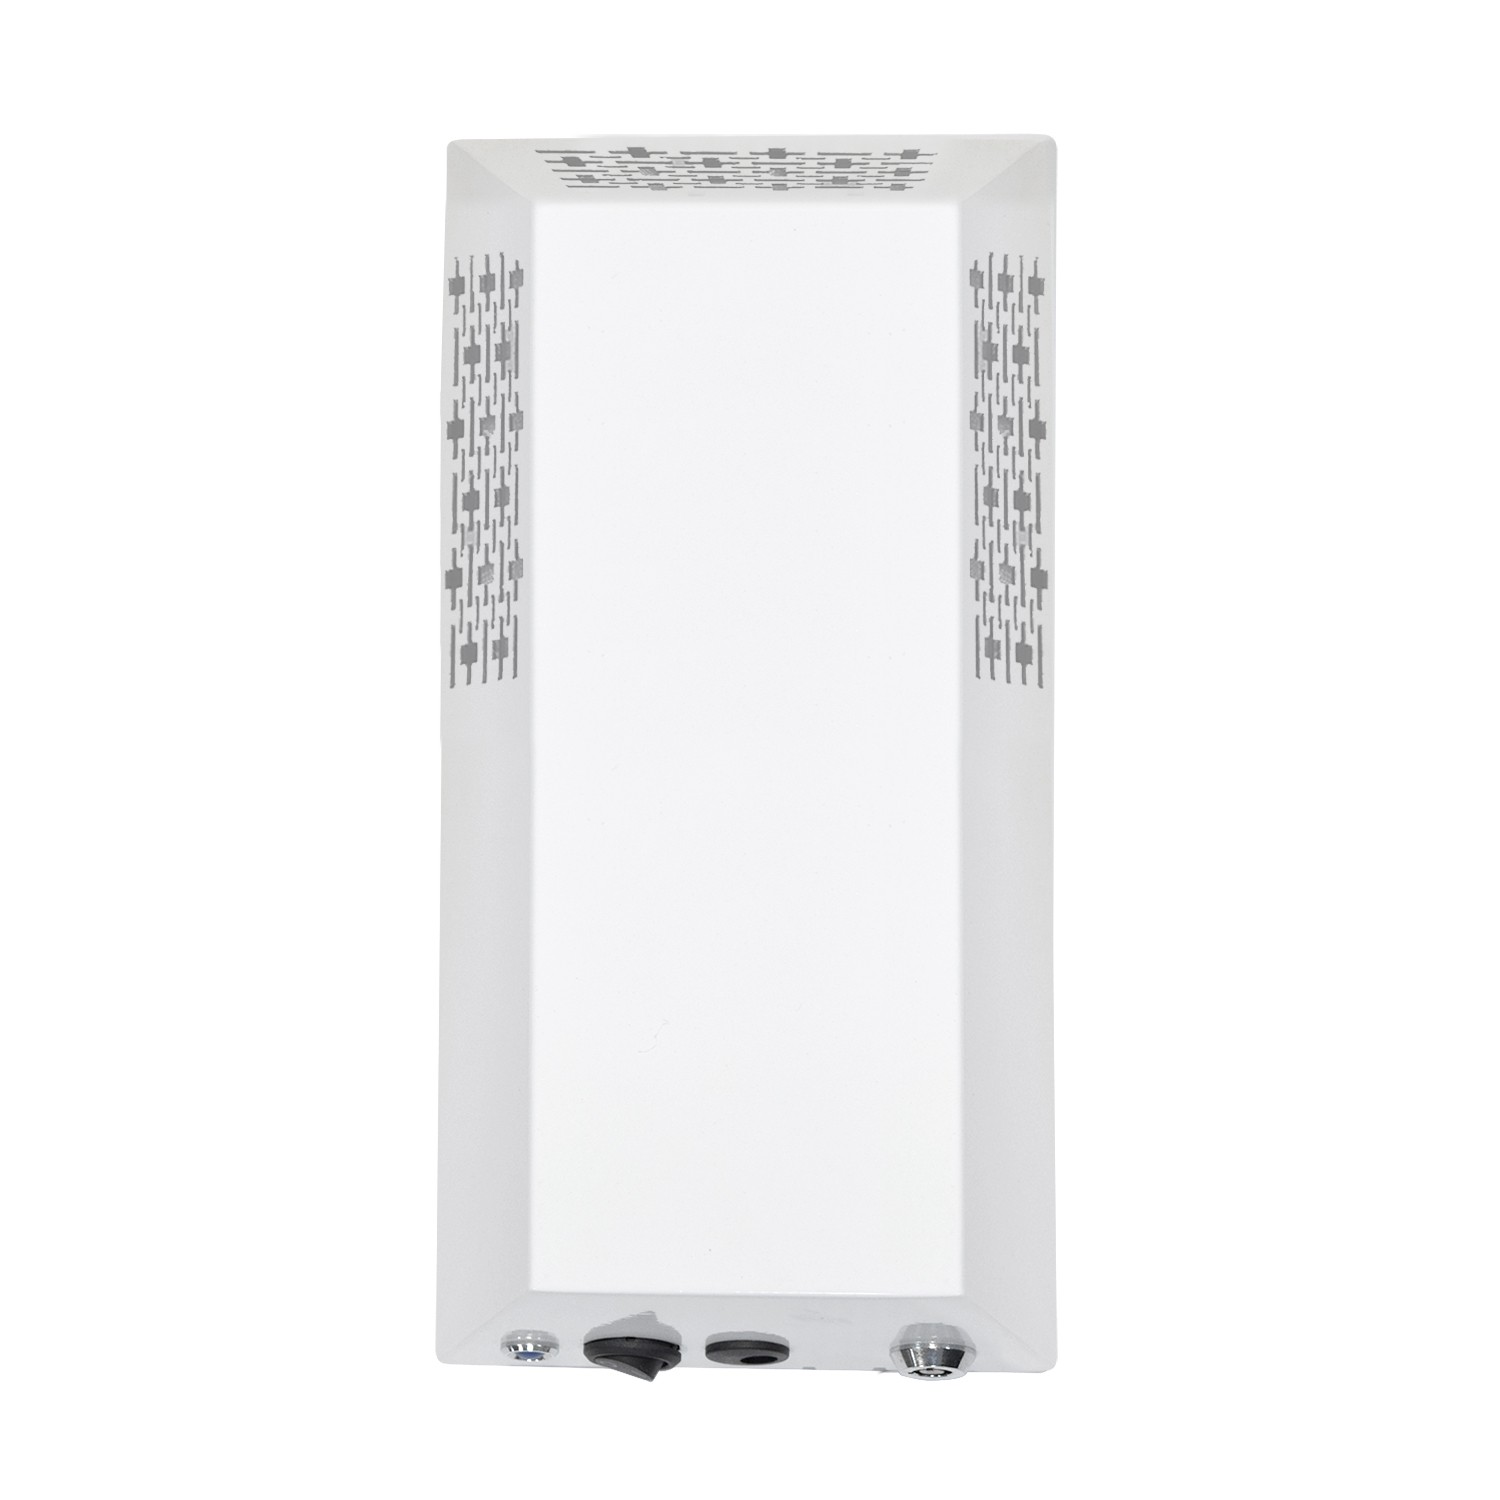 PS-400T1 Elevator Cabin Air Purifier With Bipolar Ionizer